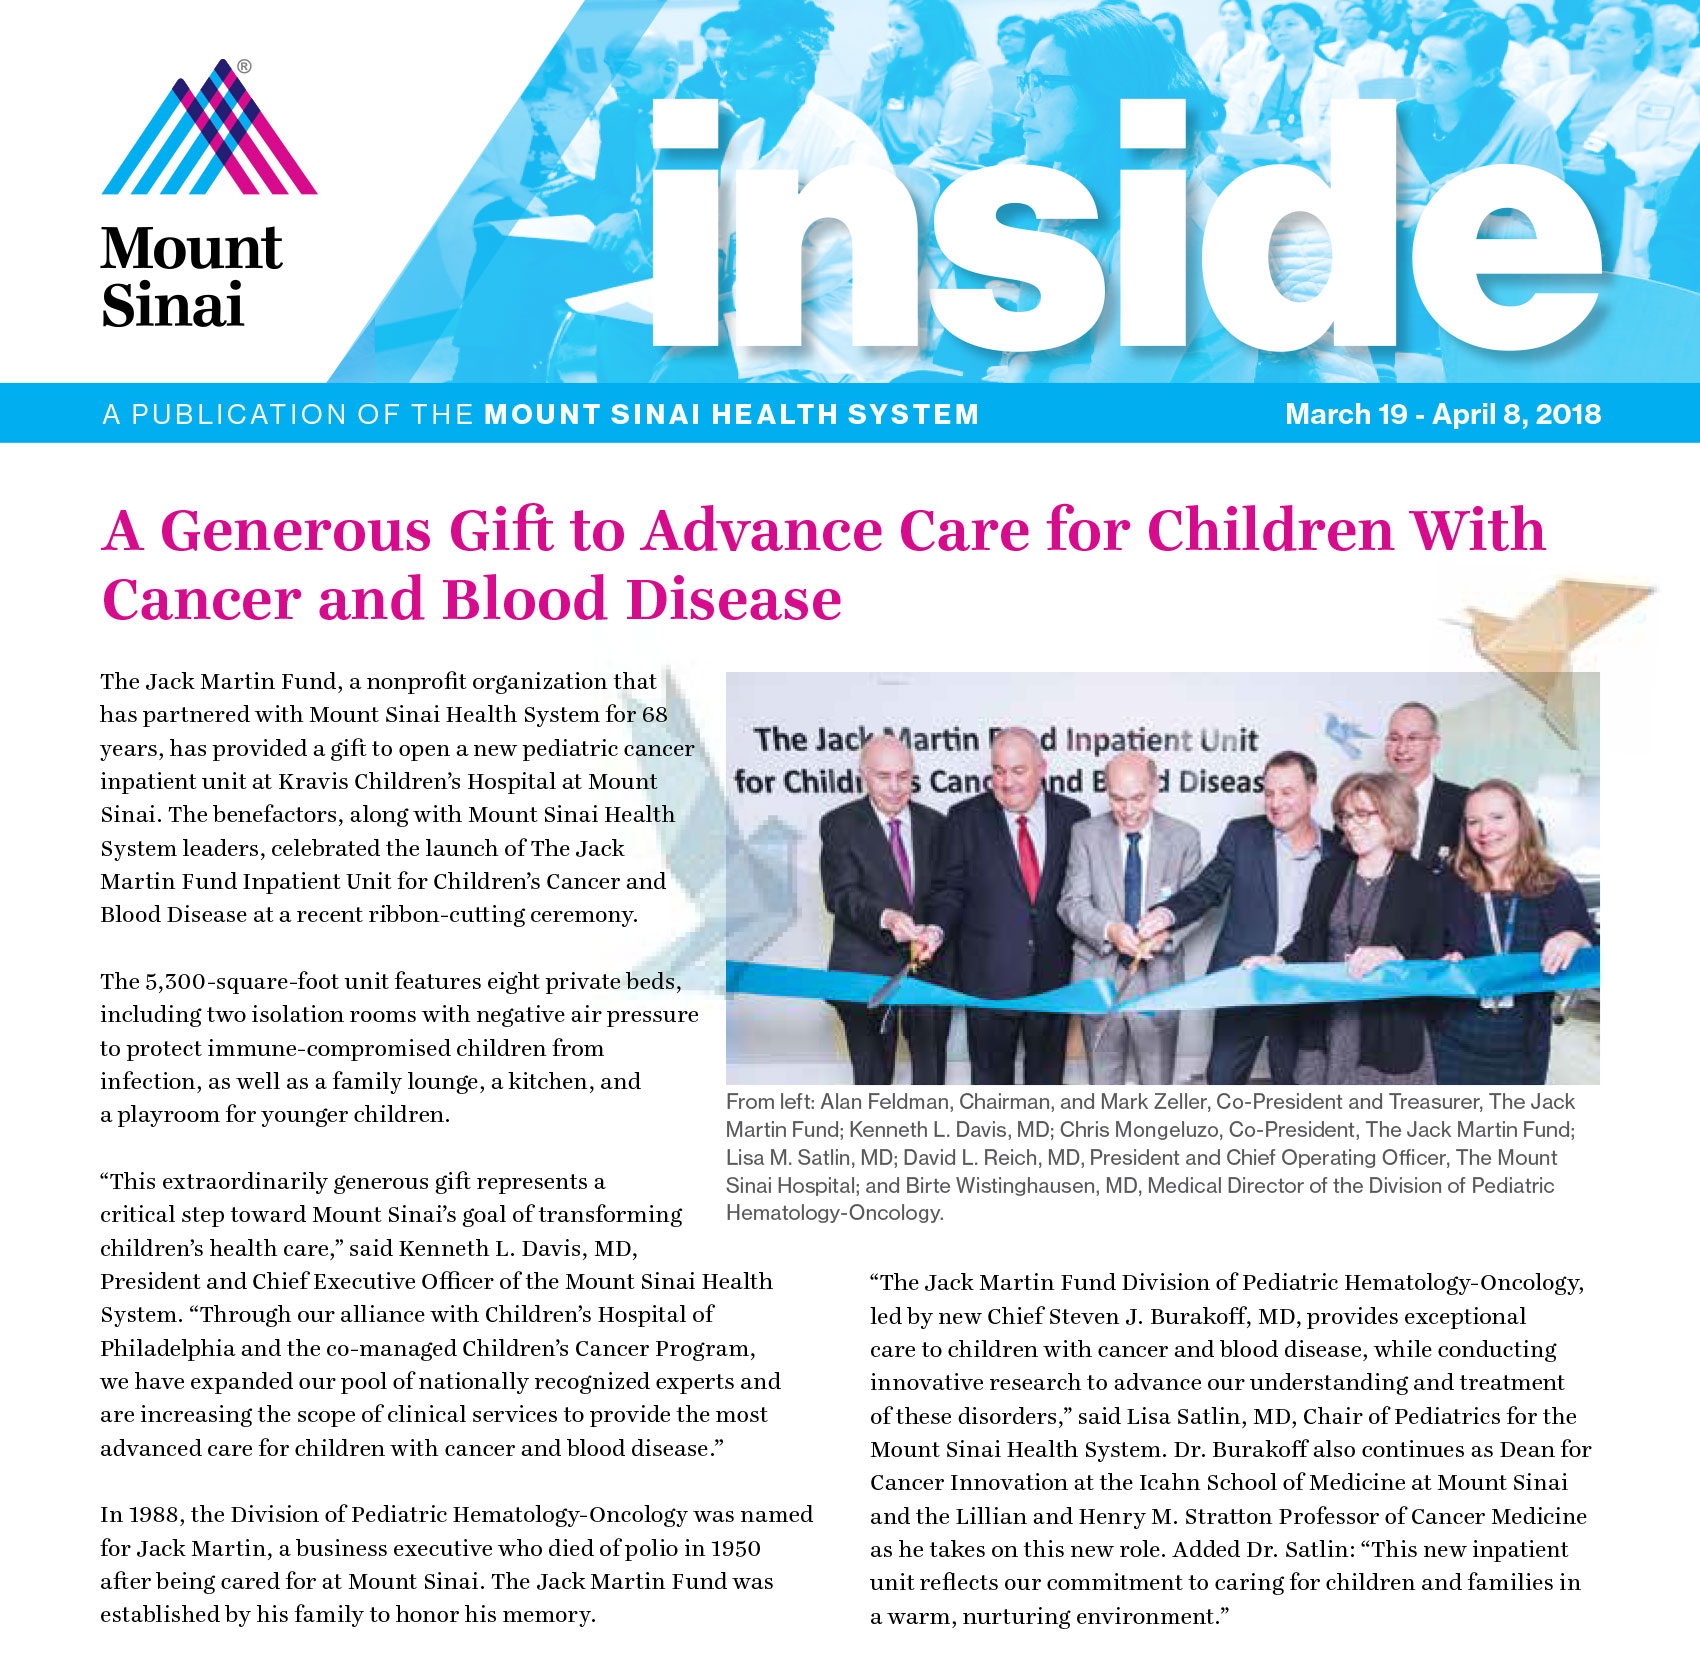 2018 – A Generous Gift to Advance Care for Children with Cancer and Blood Disease